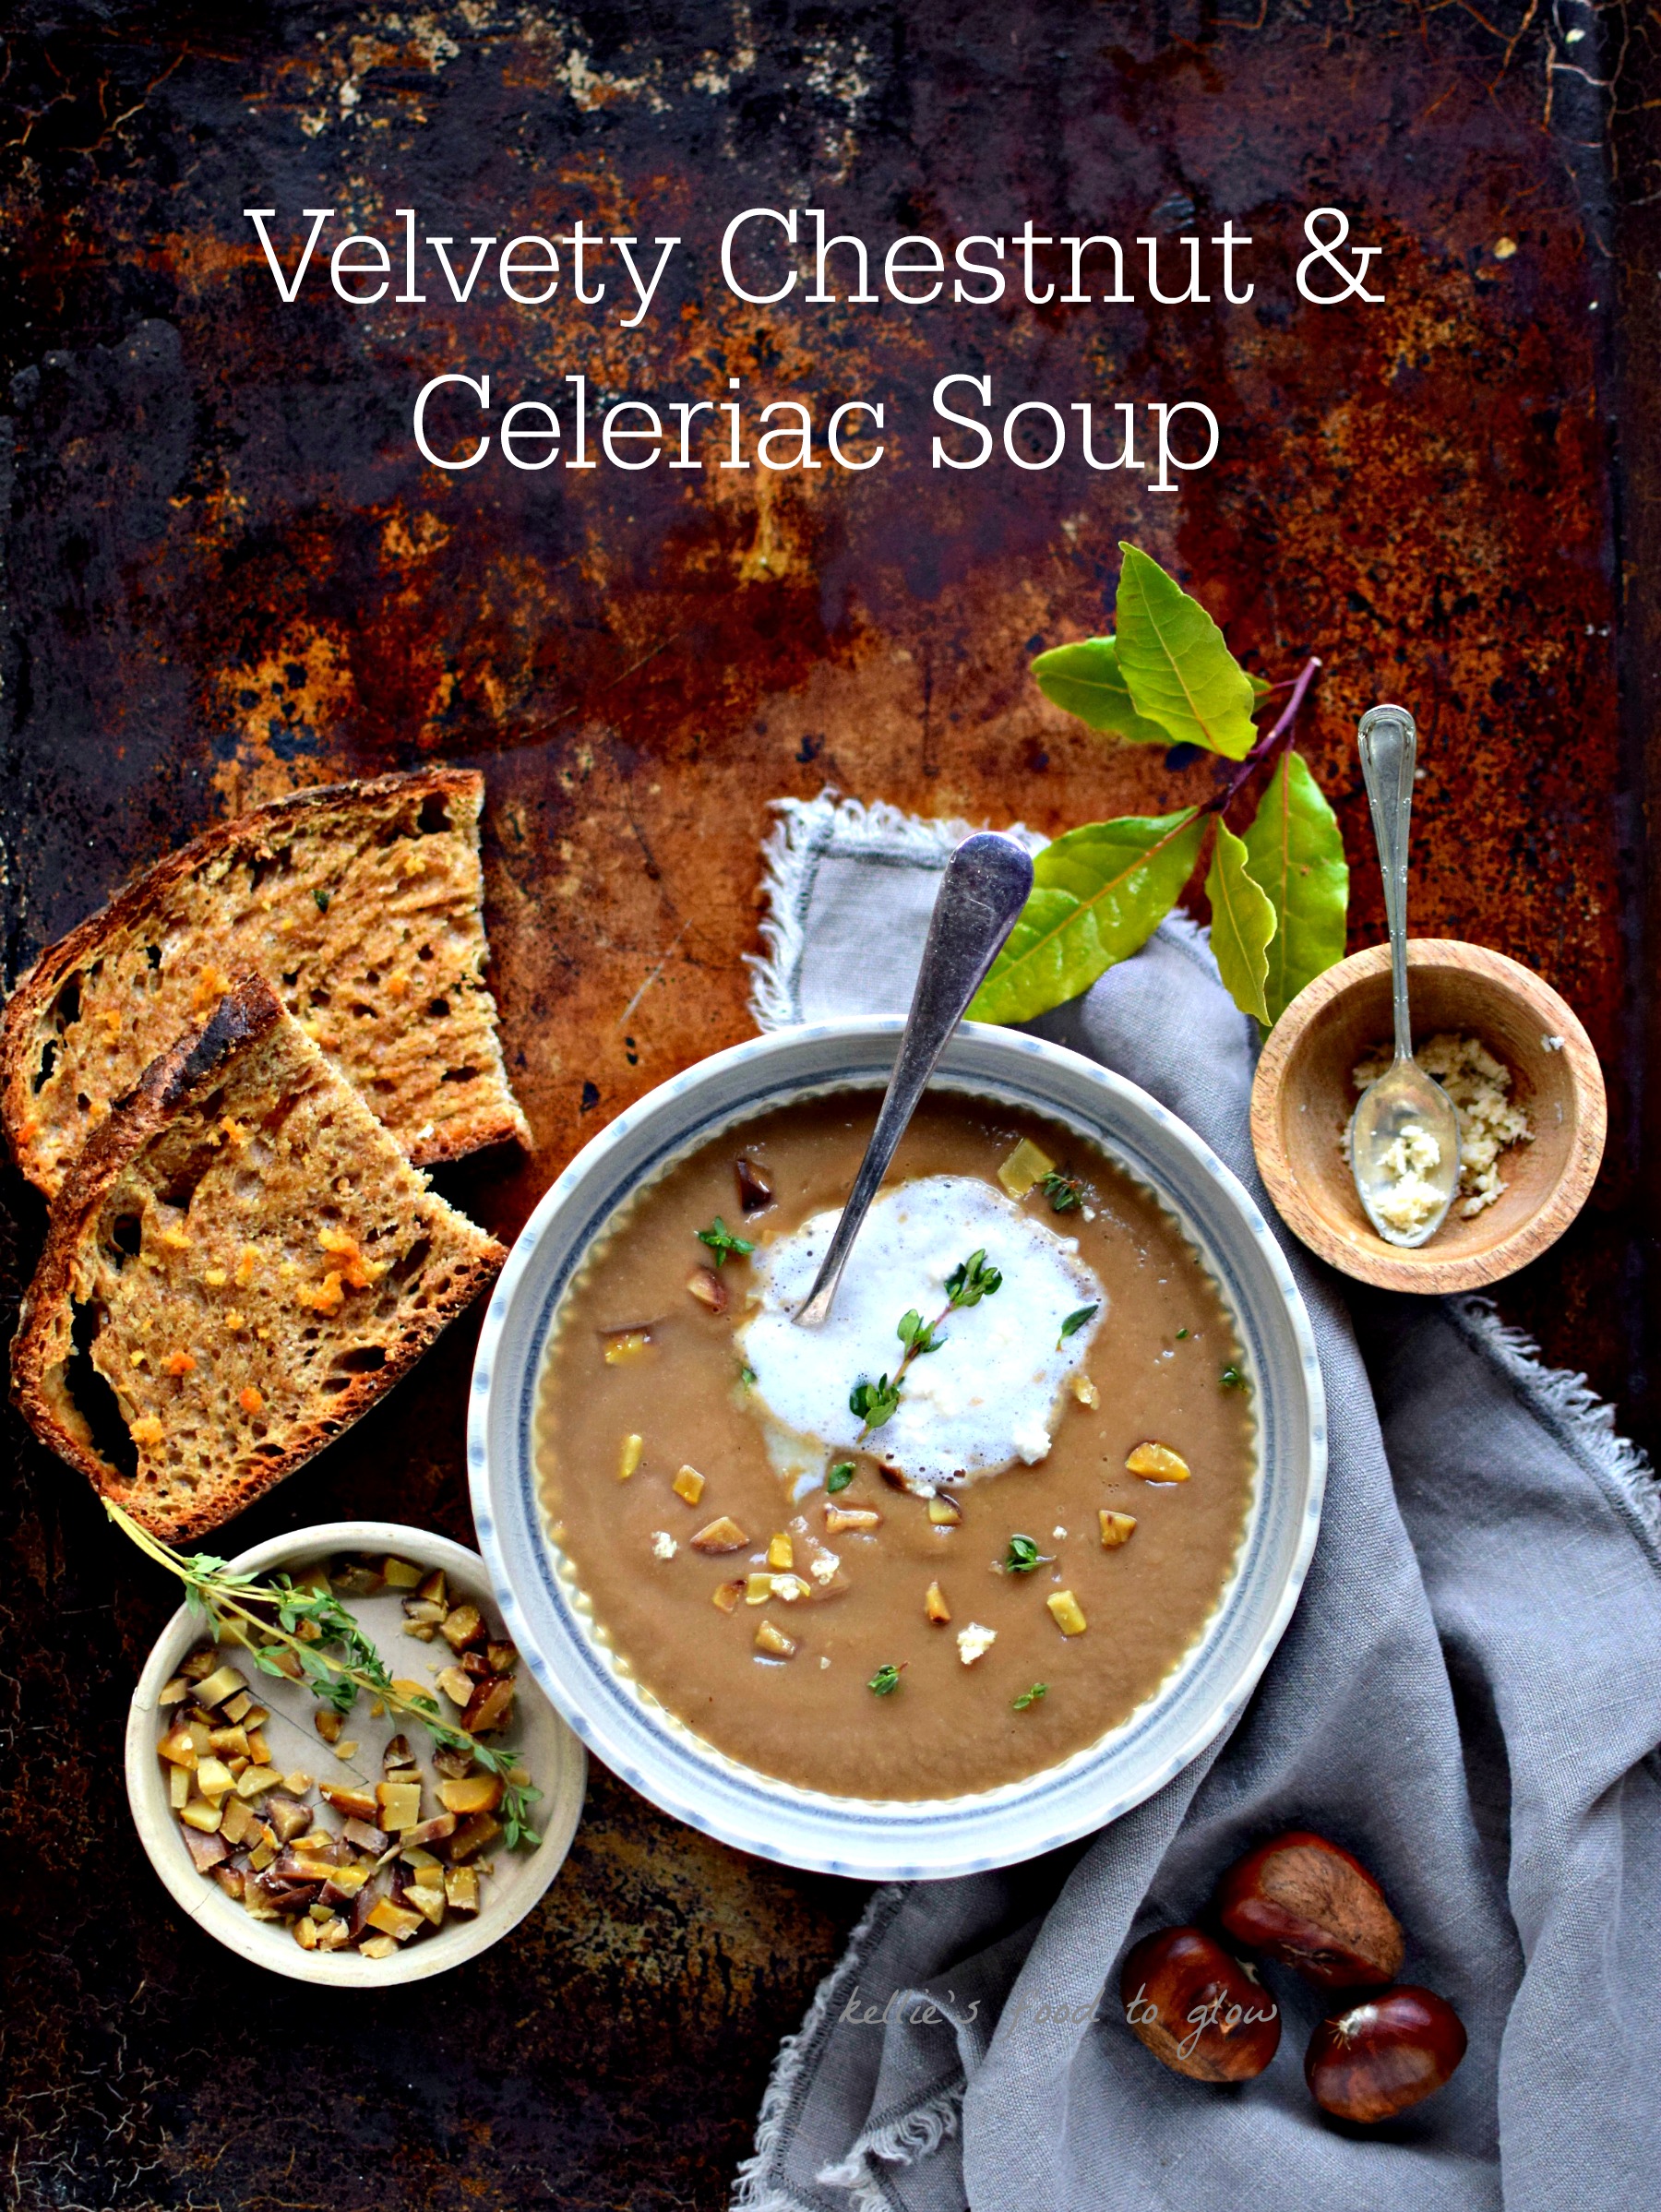 Chestnuts and celeriac bring out the best in each other in this luxurious, velvety smooth low calorie winter soup. Add an easy foam, plus horseradish-truffle toast to make it fancy - even on a wet weekday afternoon. The soup is gluten-free and vegan.